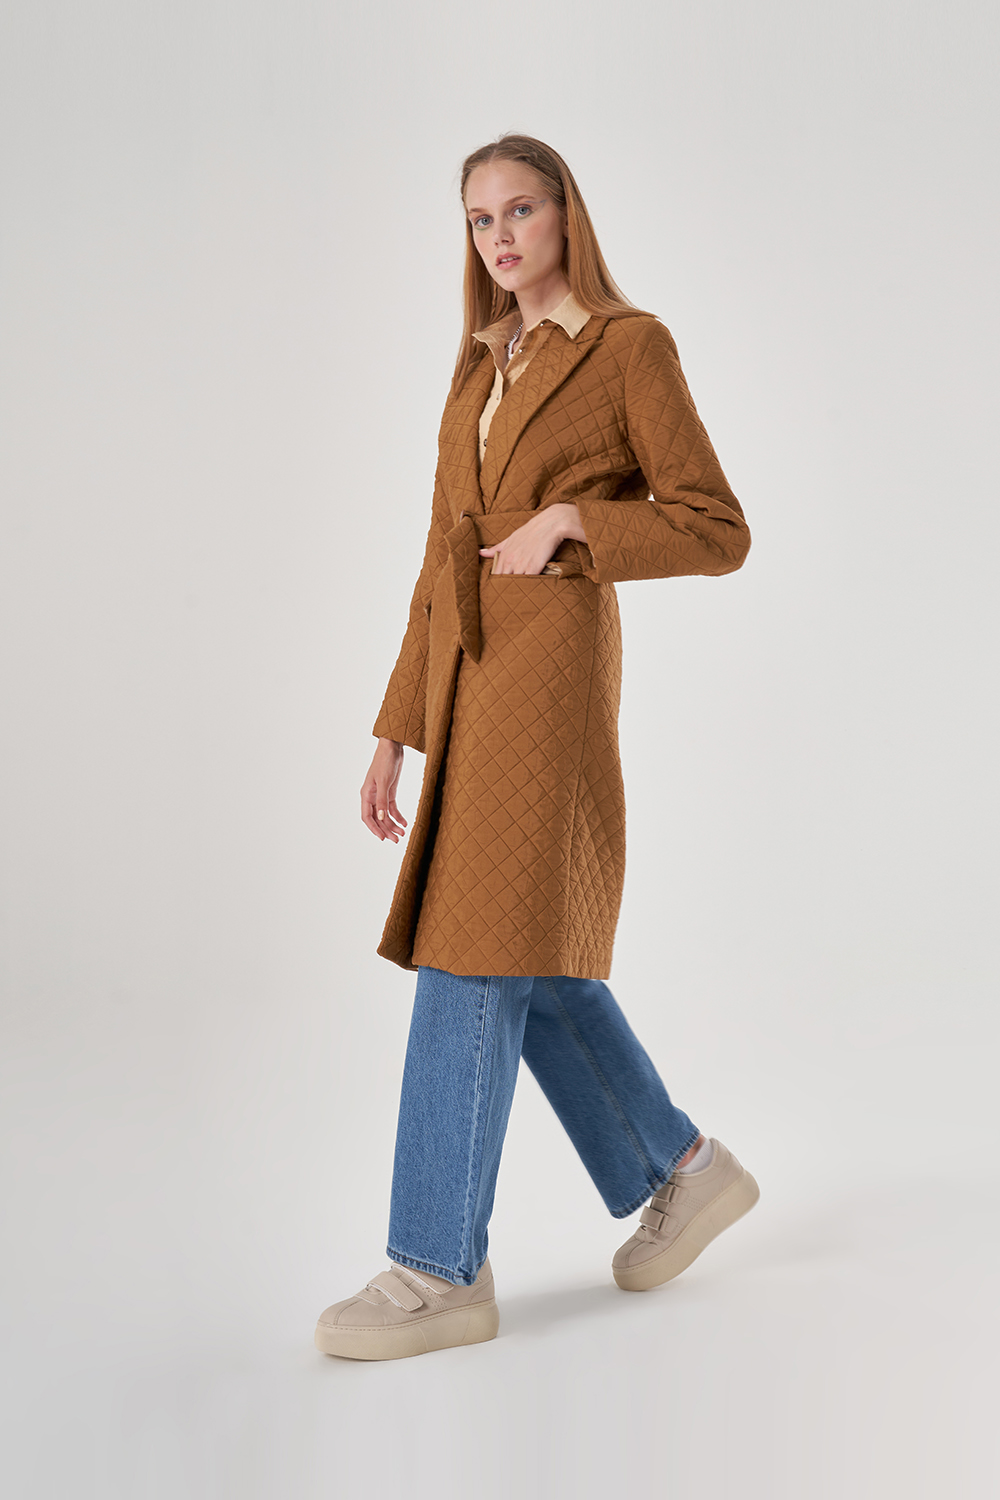 Quilted Textured Tan Overcoat